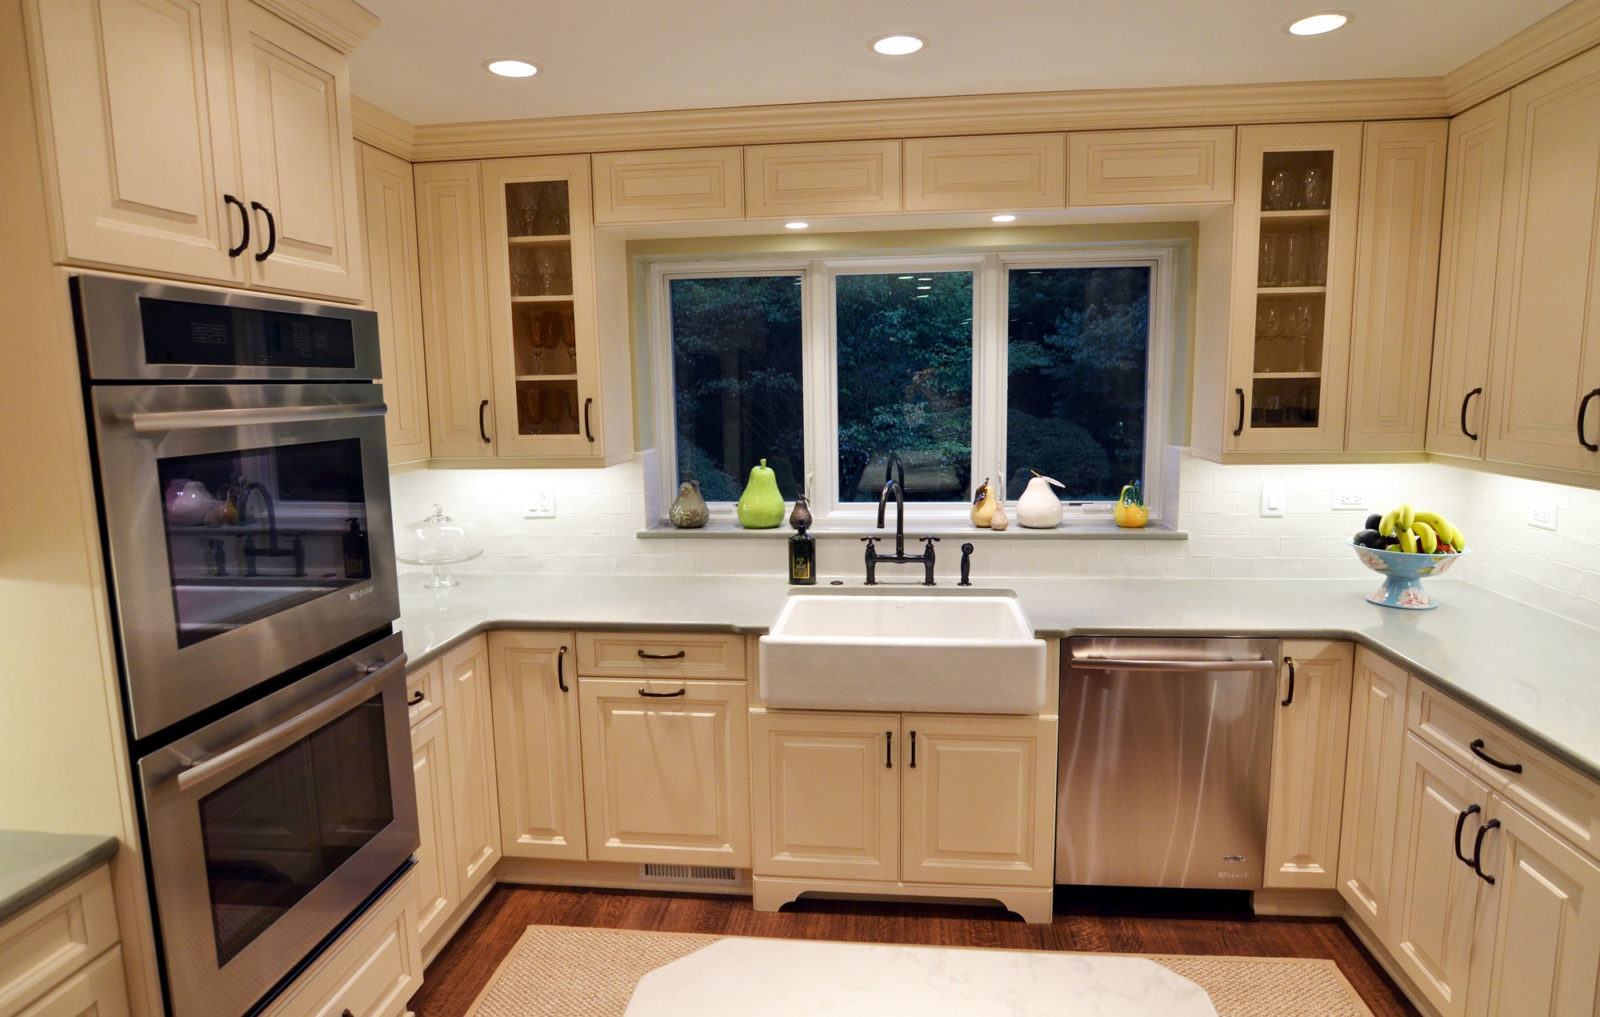 the kitchen master kitchen renovation cream cabinets farmhouse sink brown finishes recess lighting